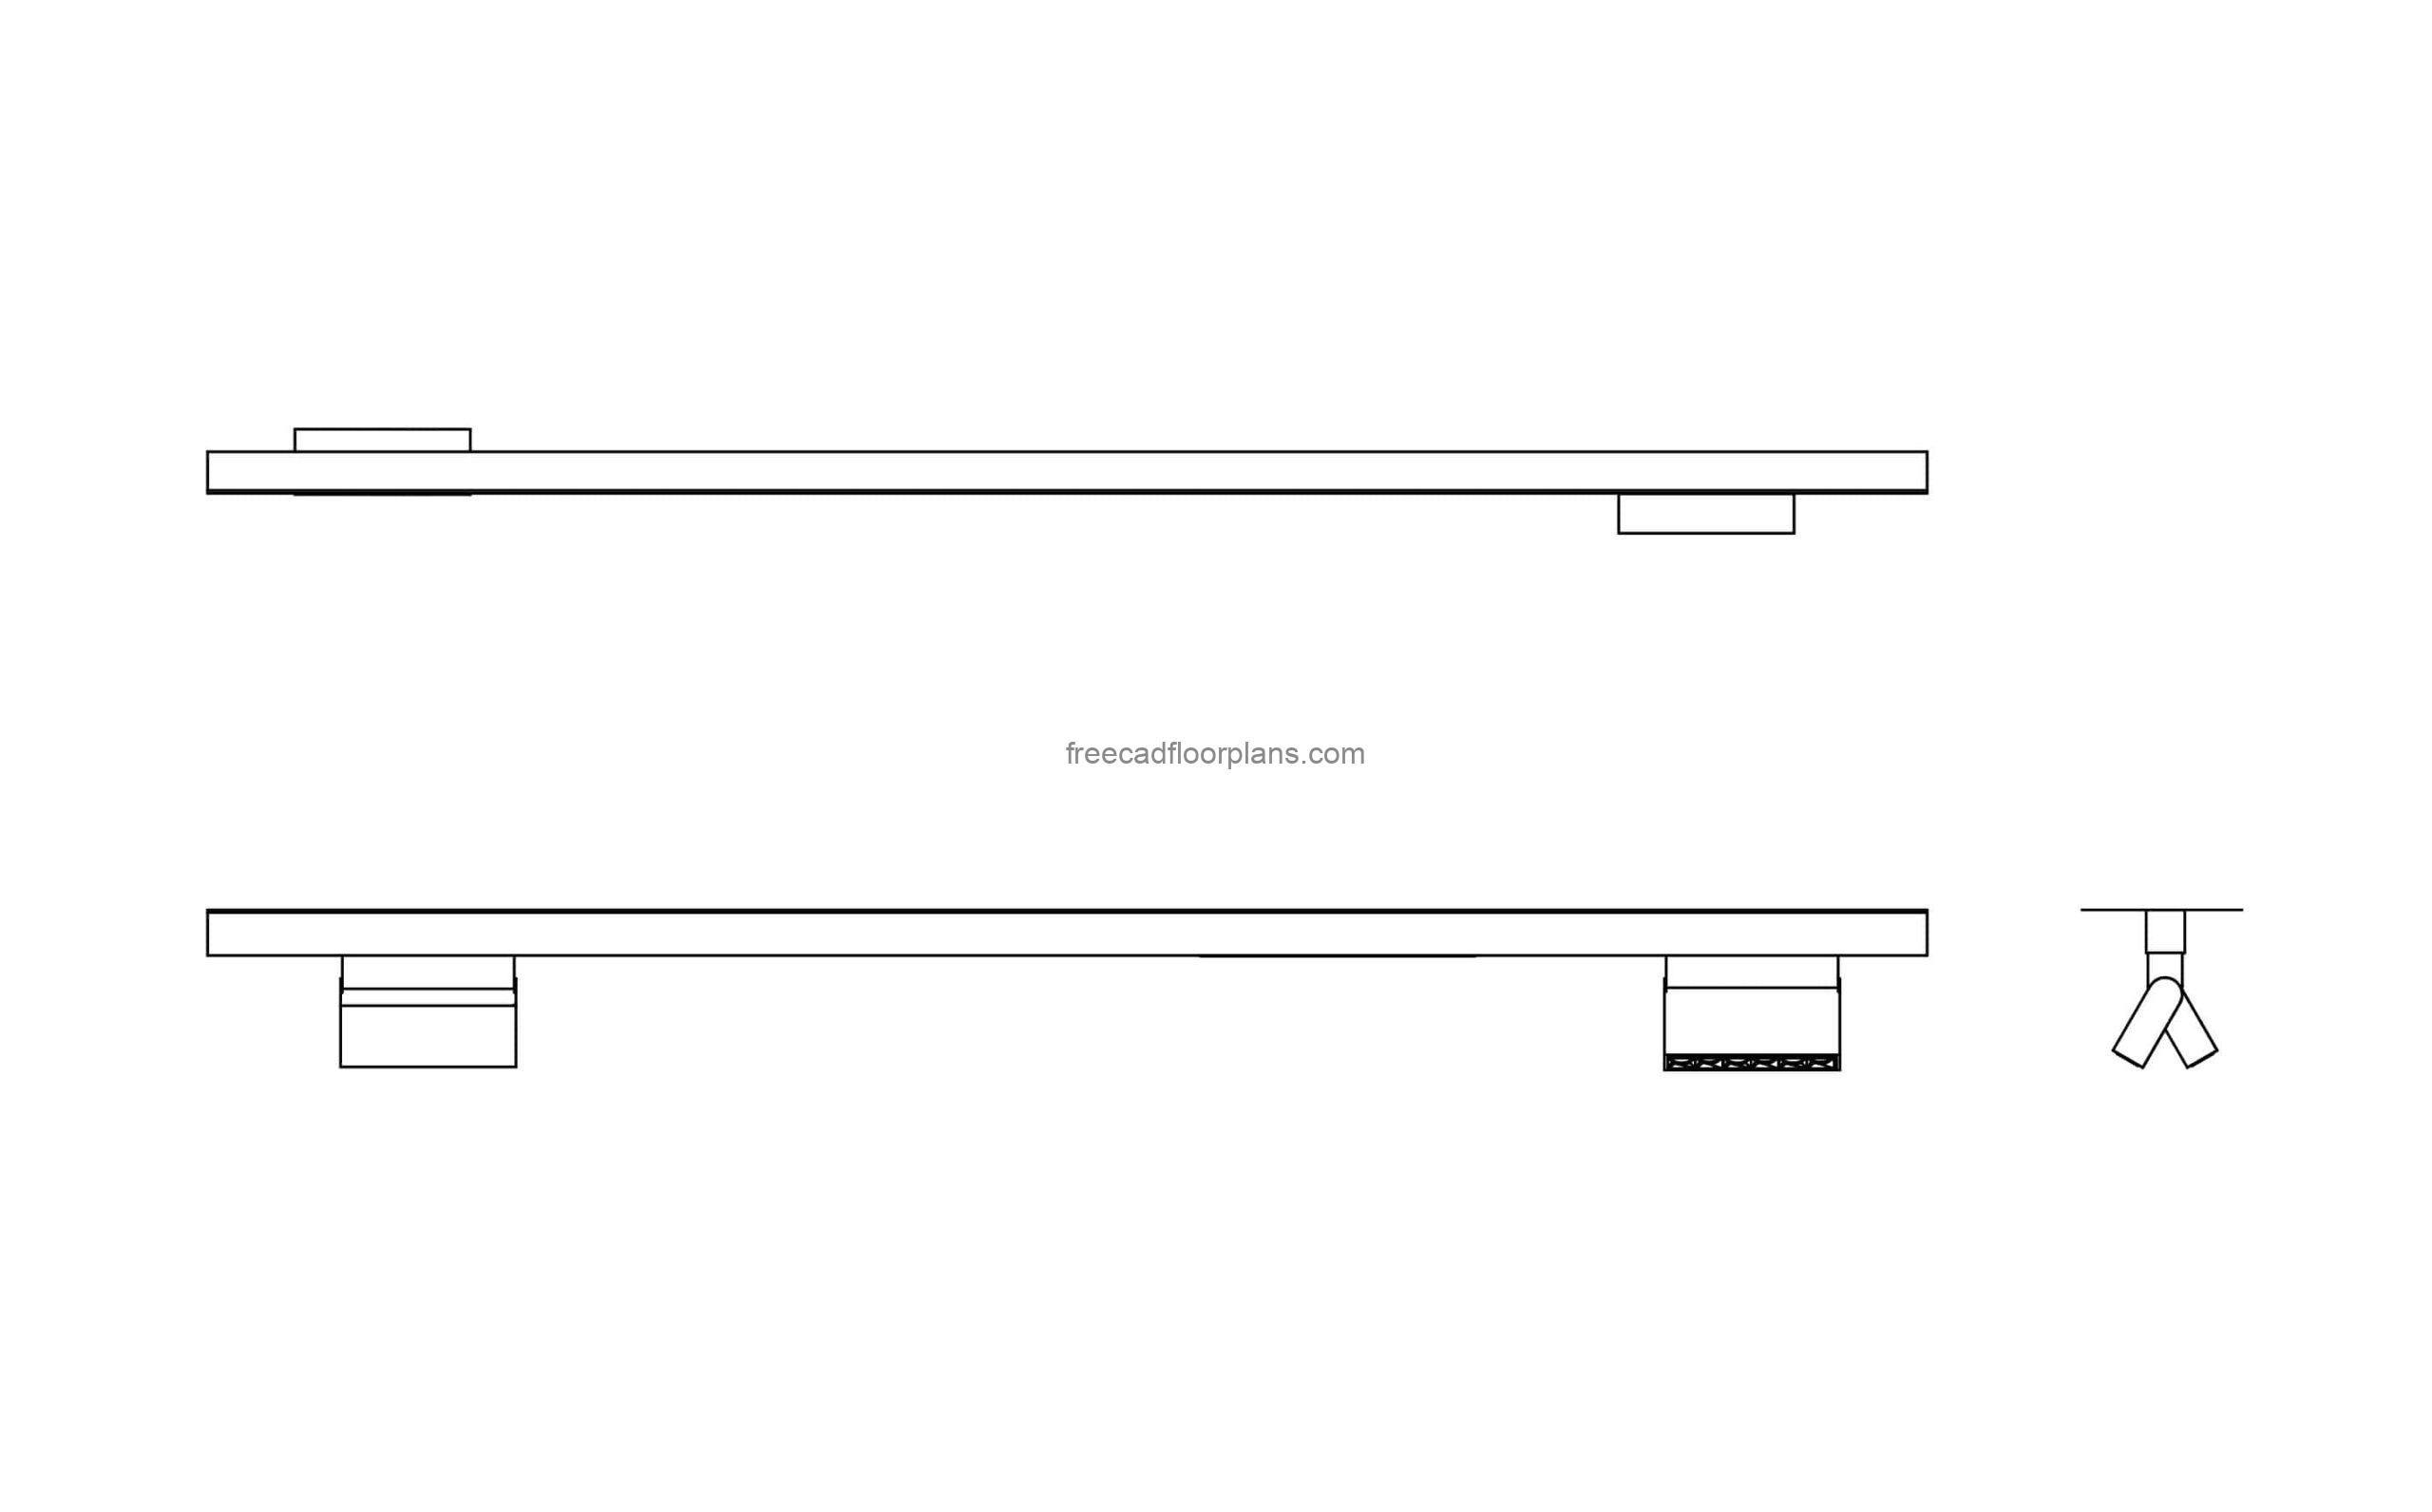 magnetic track light autocad drawing cad block with 2d views plan and elevations for free download